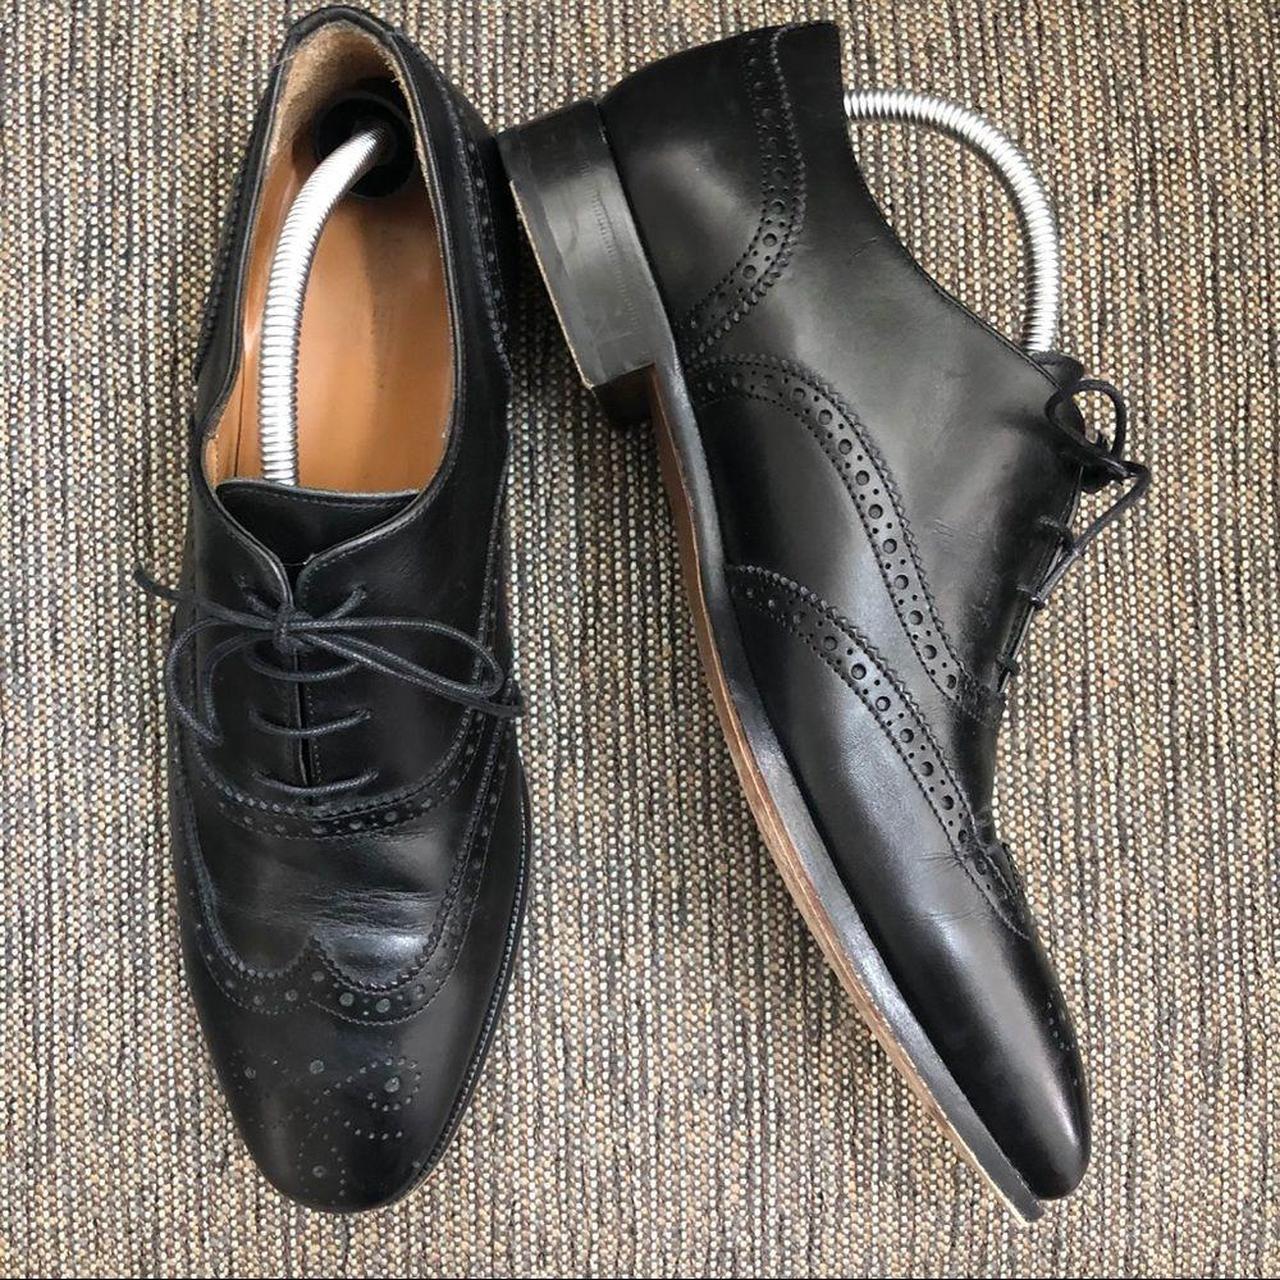 Product Image 1 - Jack Erwin Oxford Brogues shoes